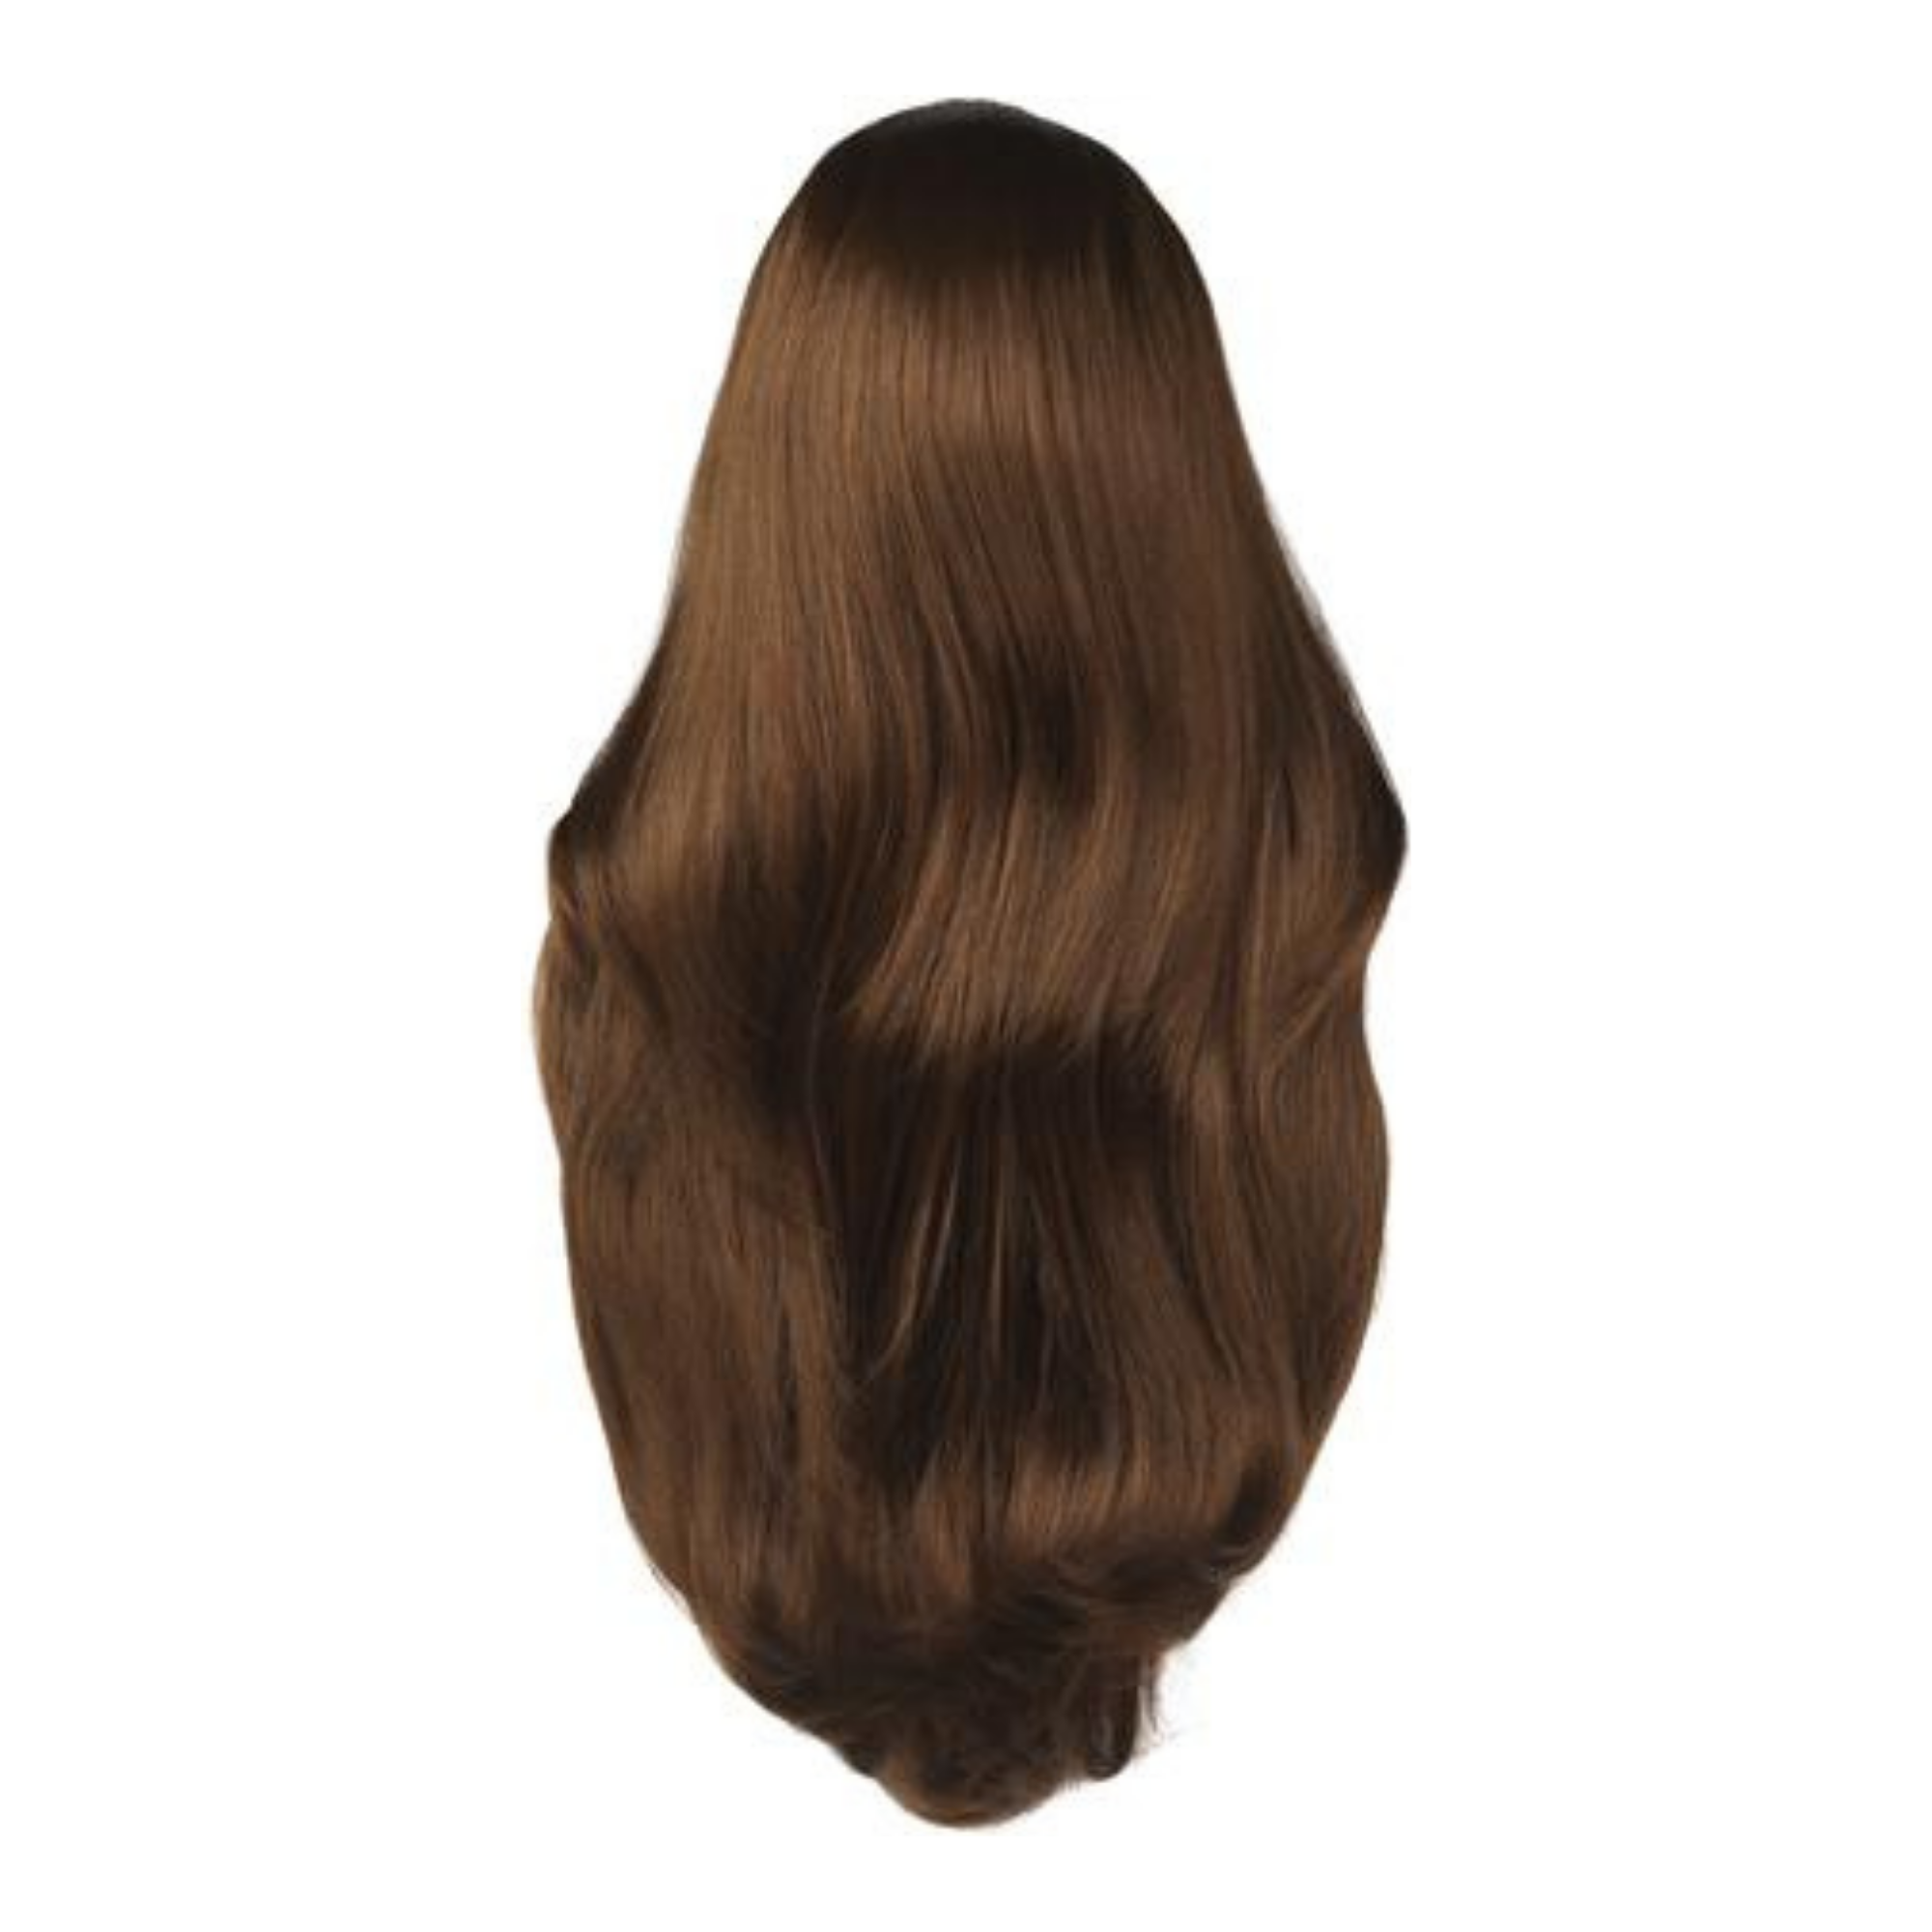 image of hair rehab london half wig hairpiece in shade cocoa